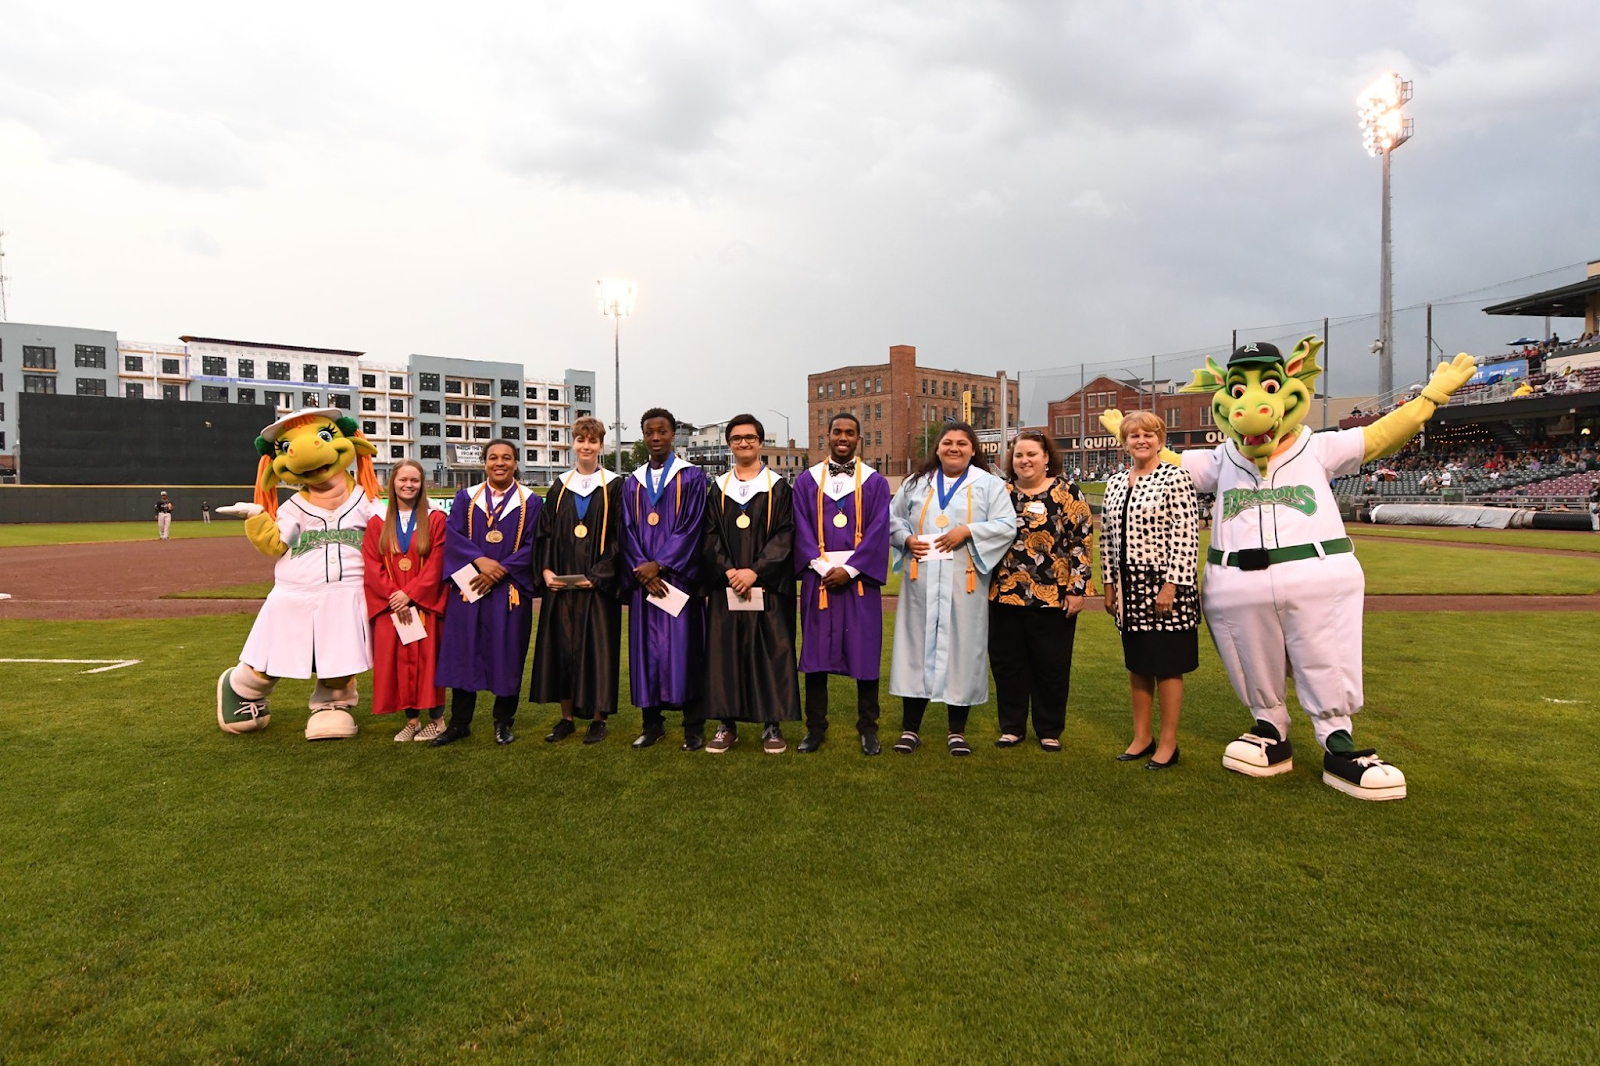 Valedictorians and Salutatorians posing with Dayton Dragons mascots Heater and Gem